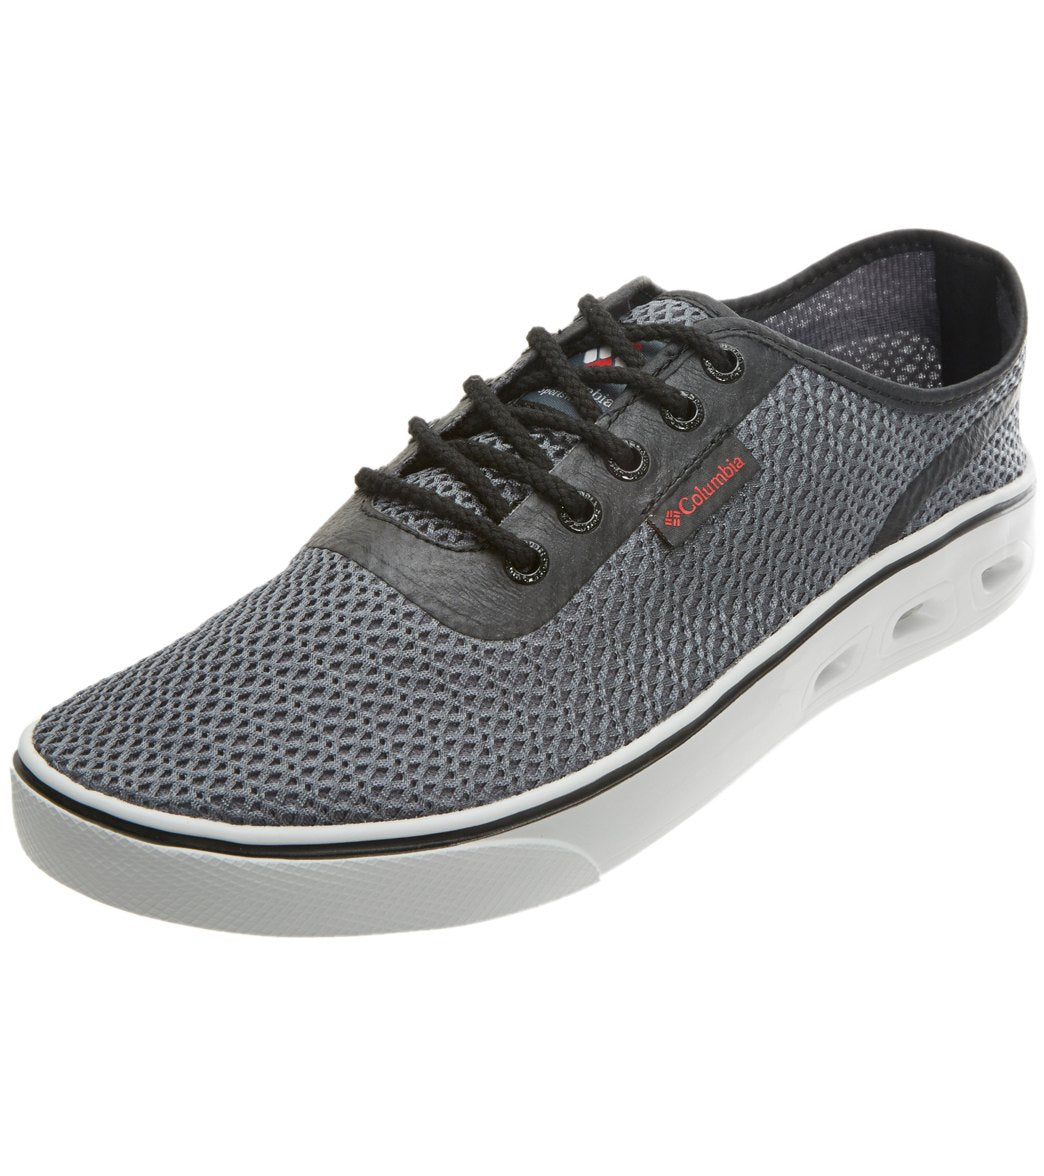 Columbia Men's Spinner Vent Shoe at SwimOutlet.com